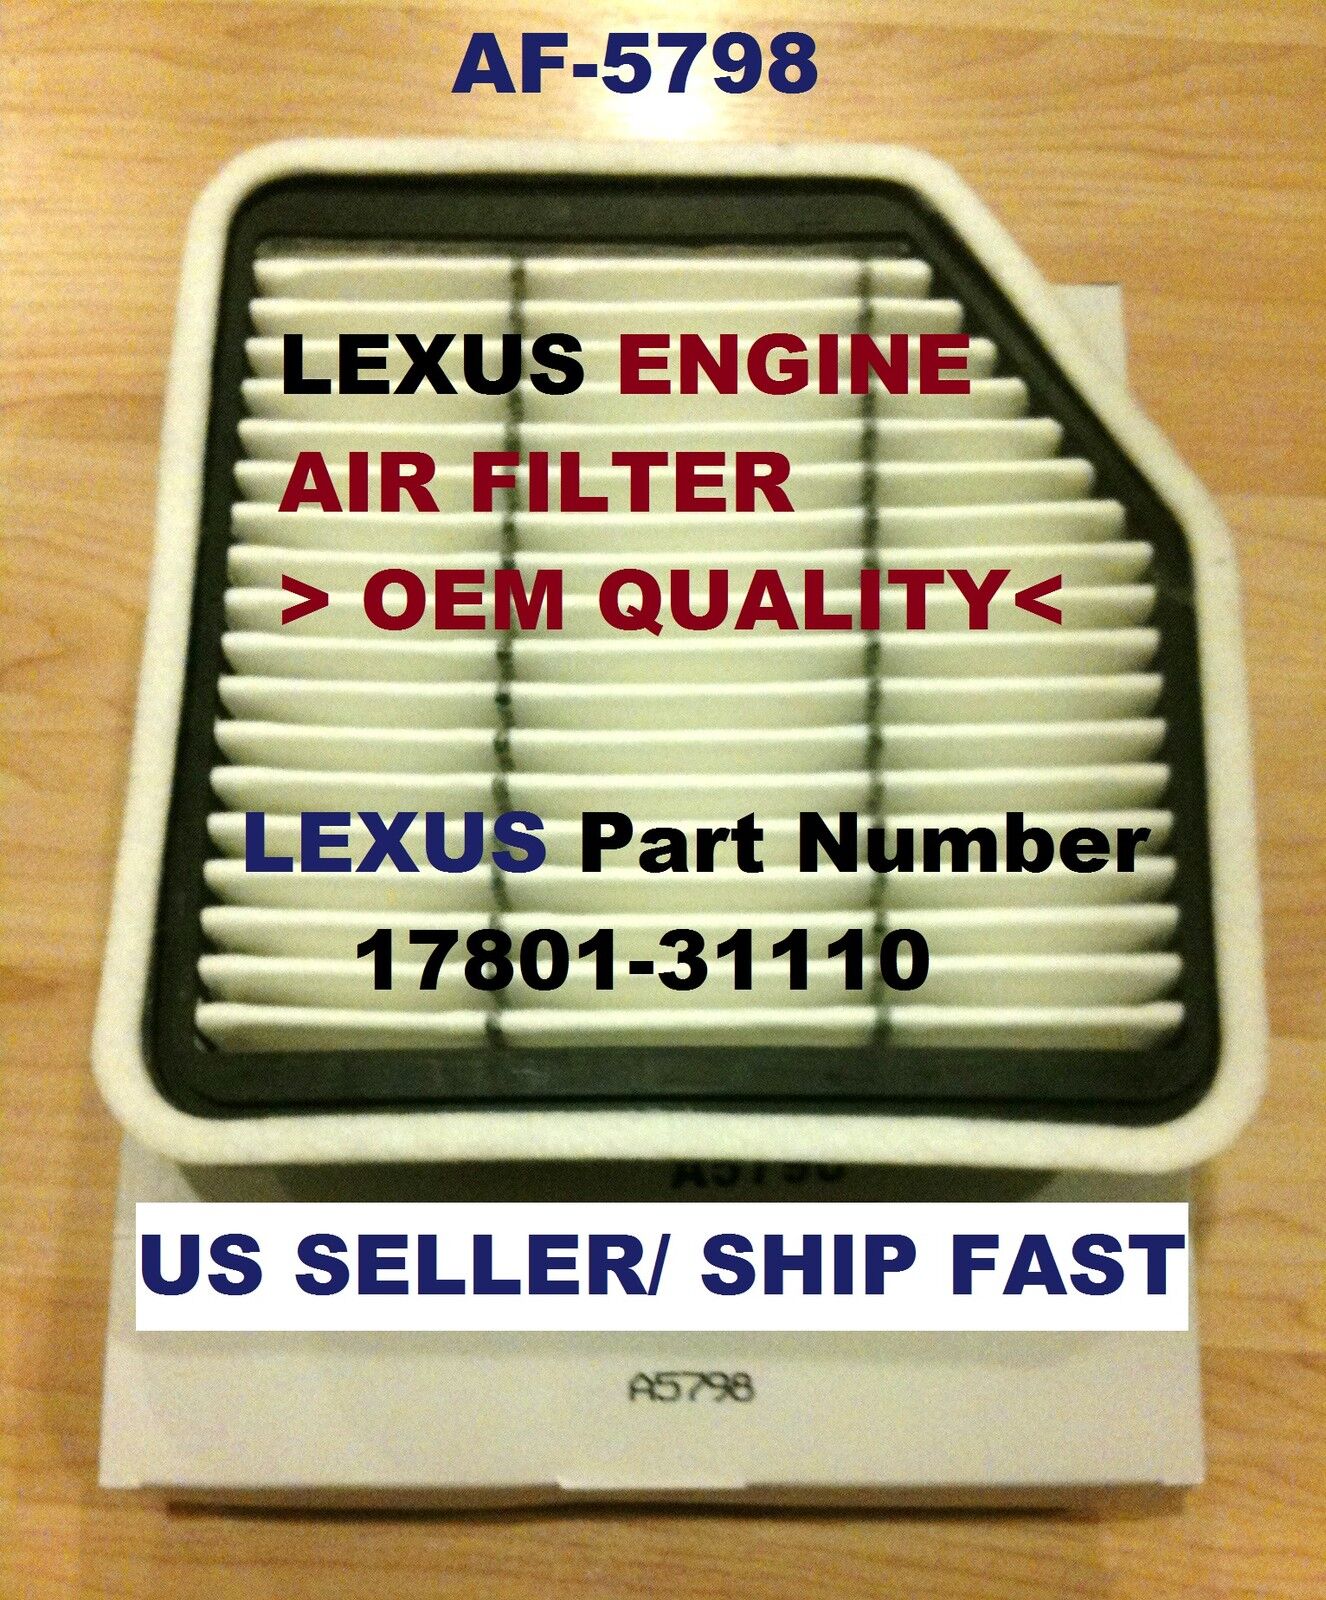 Engine Air Filter for LEXUS 06-13 IS250 IS350 10-15 IS250C IS350C GS350 GS430